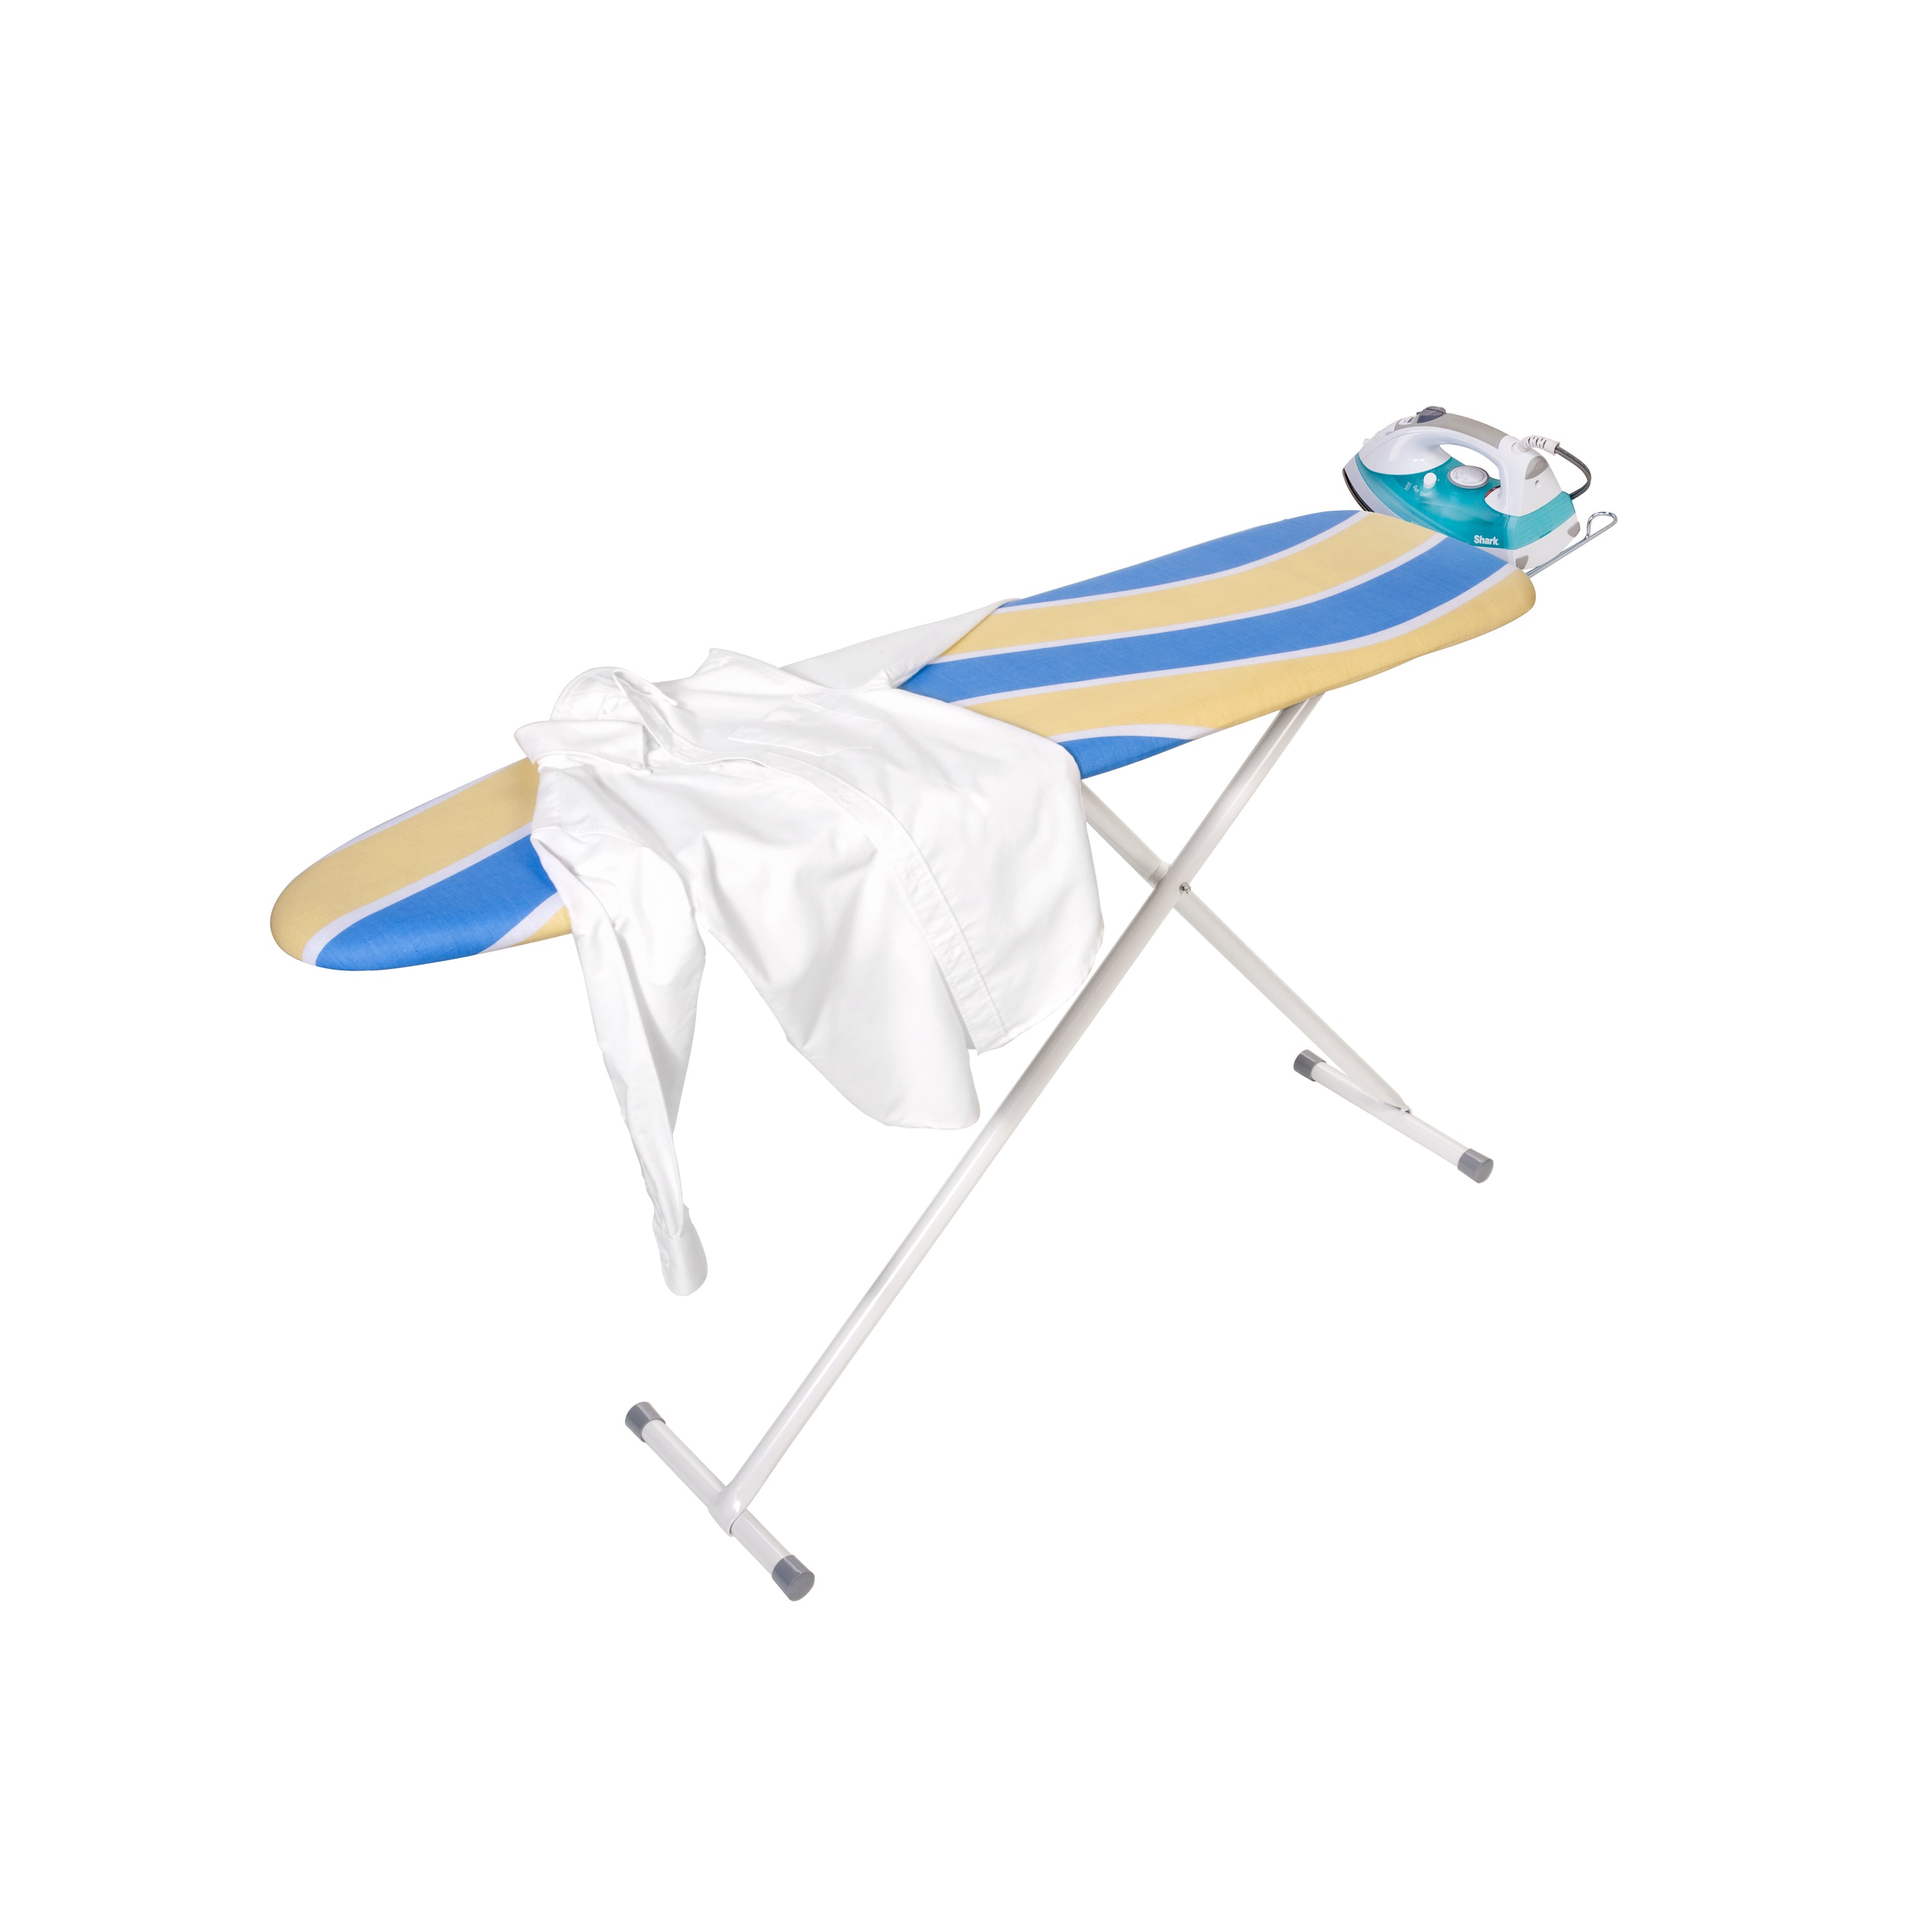 Honey-Can-Do Ironing Board with Iron Rest ,Blue